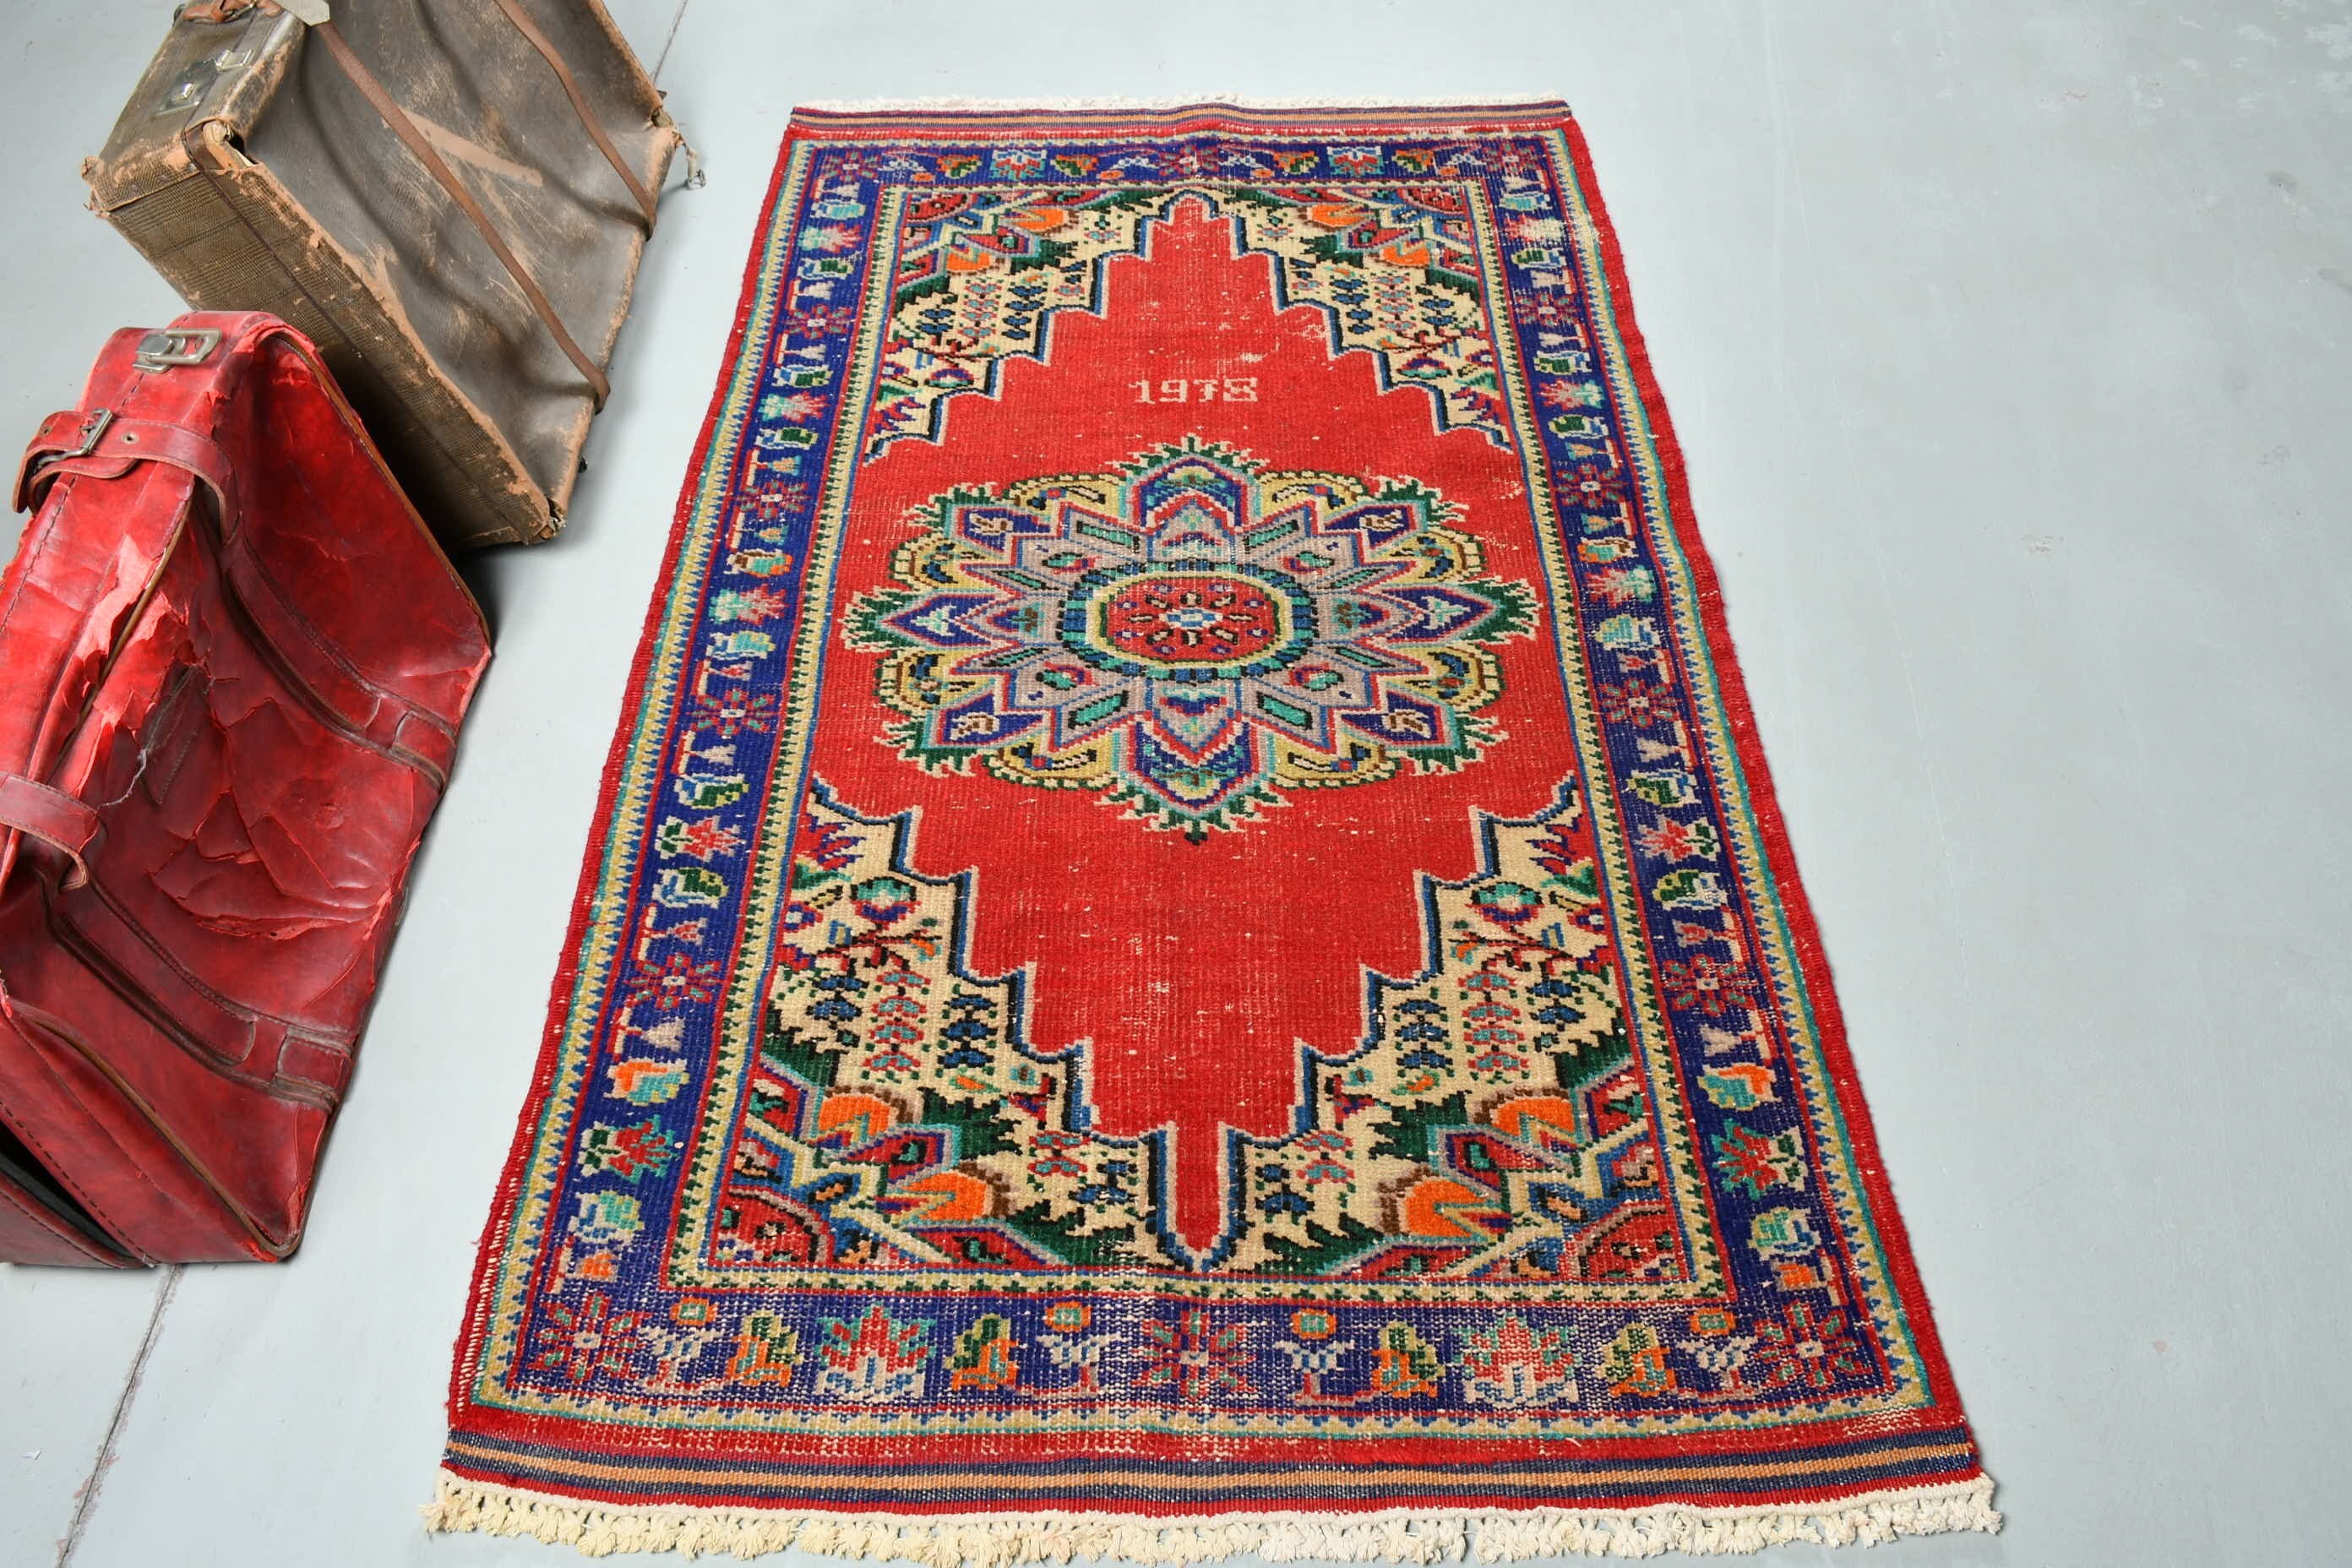 Entry Rug, Turkish Rugs, Rugs for Nursery, Moroccan Rug, Red Antique Rug, Wool Rugs, 3.5x5.6 ft Accent Rug, Kitchen Rug, Vintage Rugs